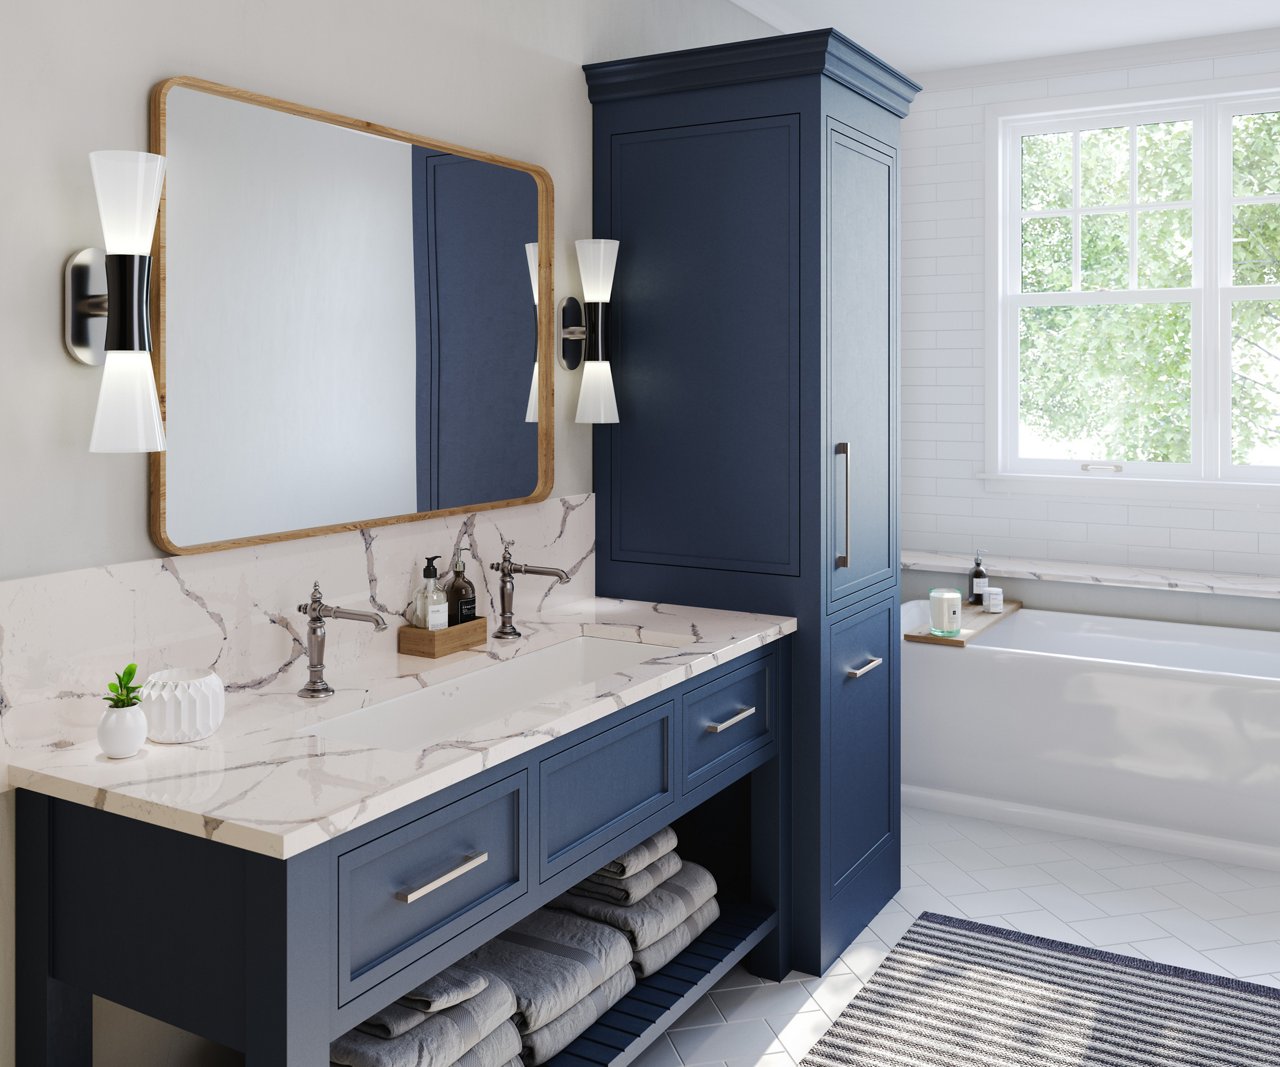 Summerbrook quartz vanity in a bathroom with blue cabinets